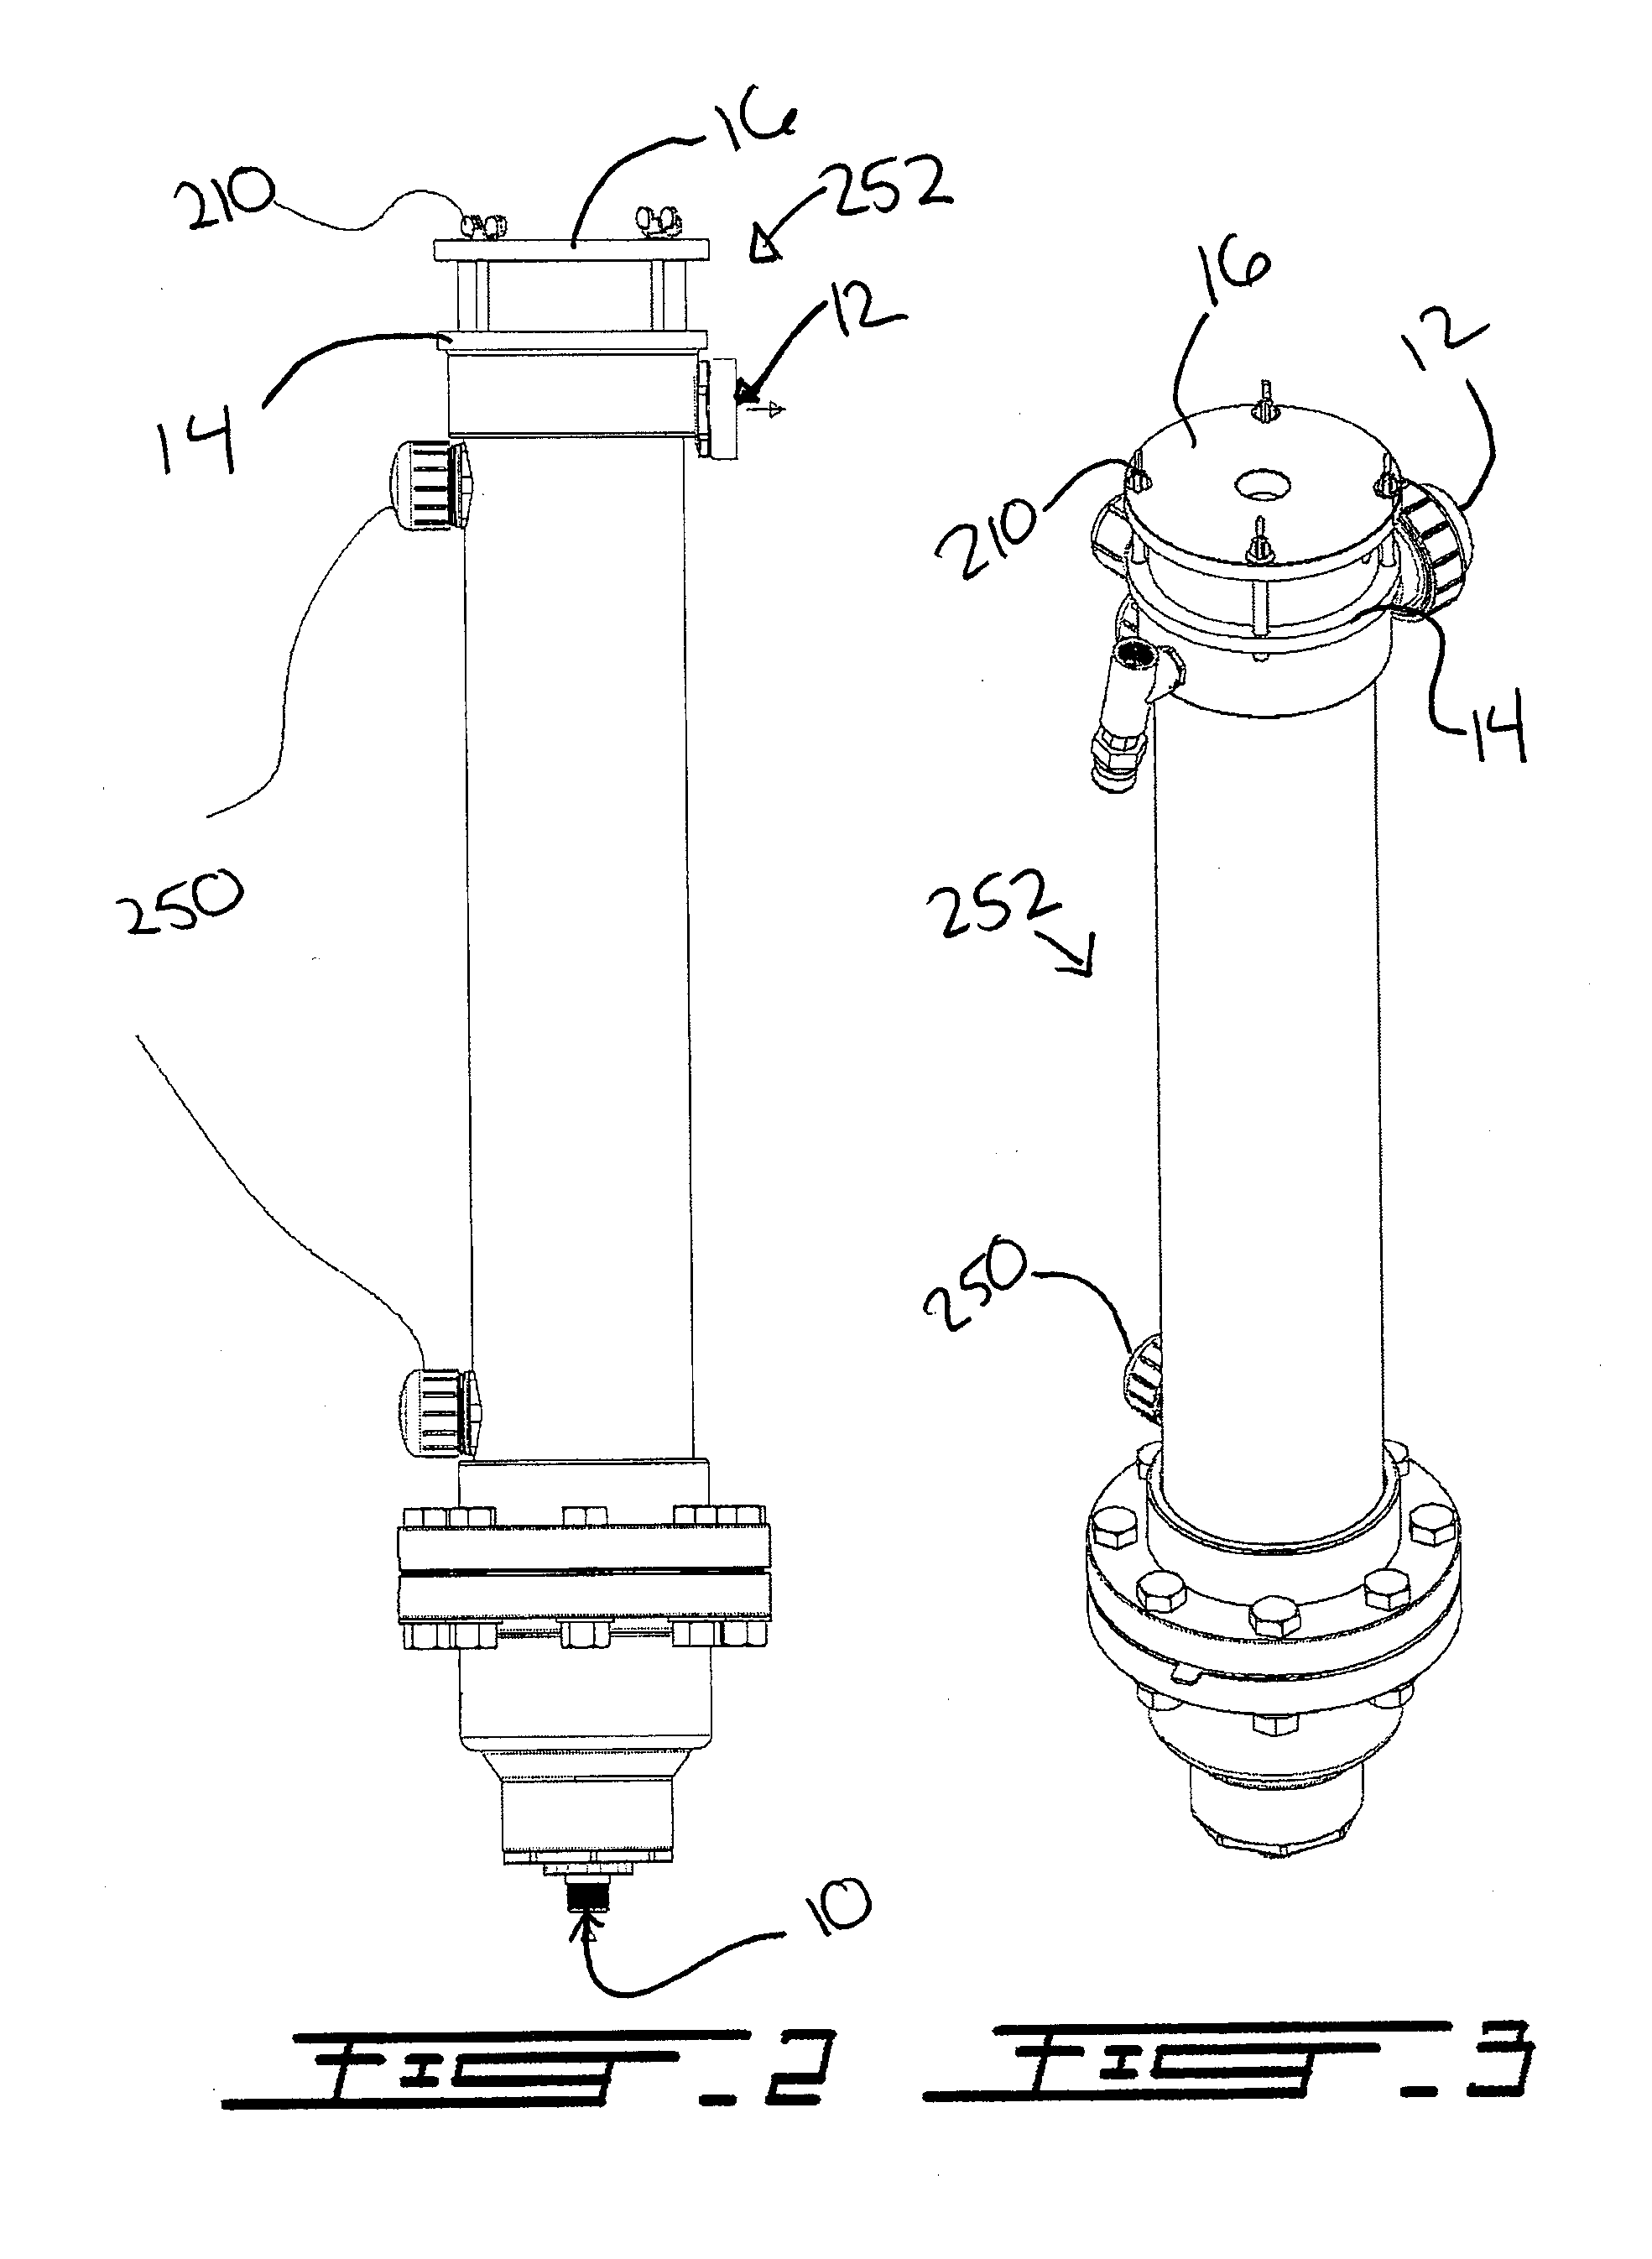 Apparatus and Method for Harvesting and Dewatering of Microalgae Biomass